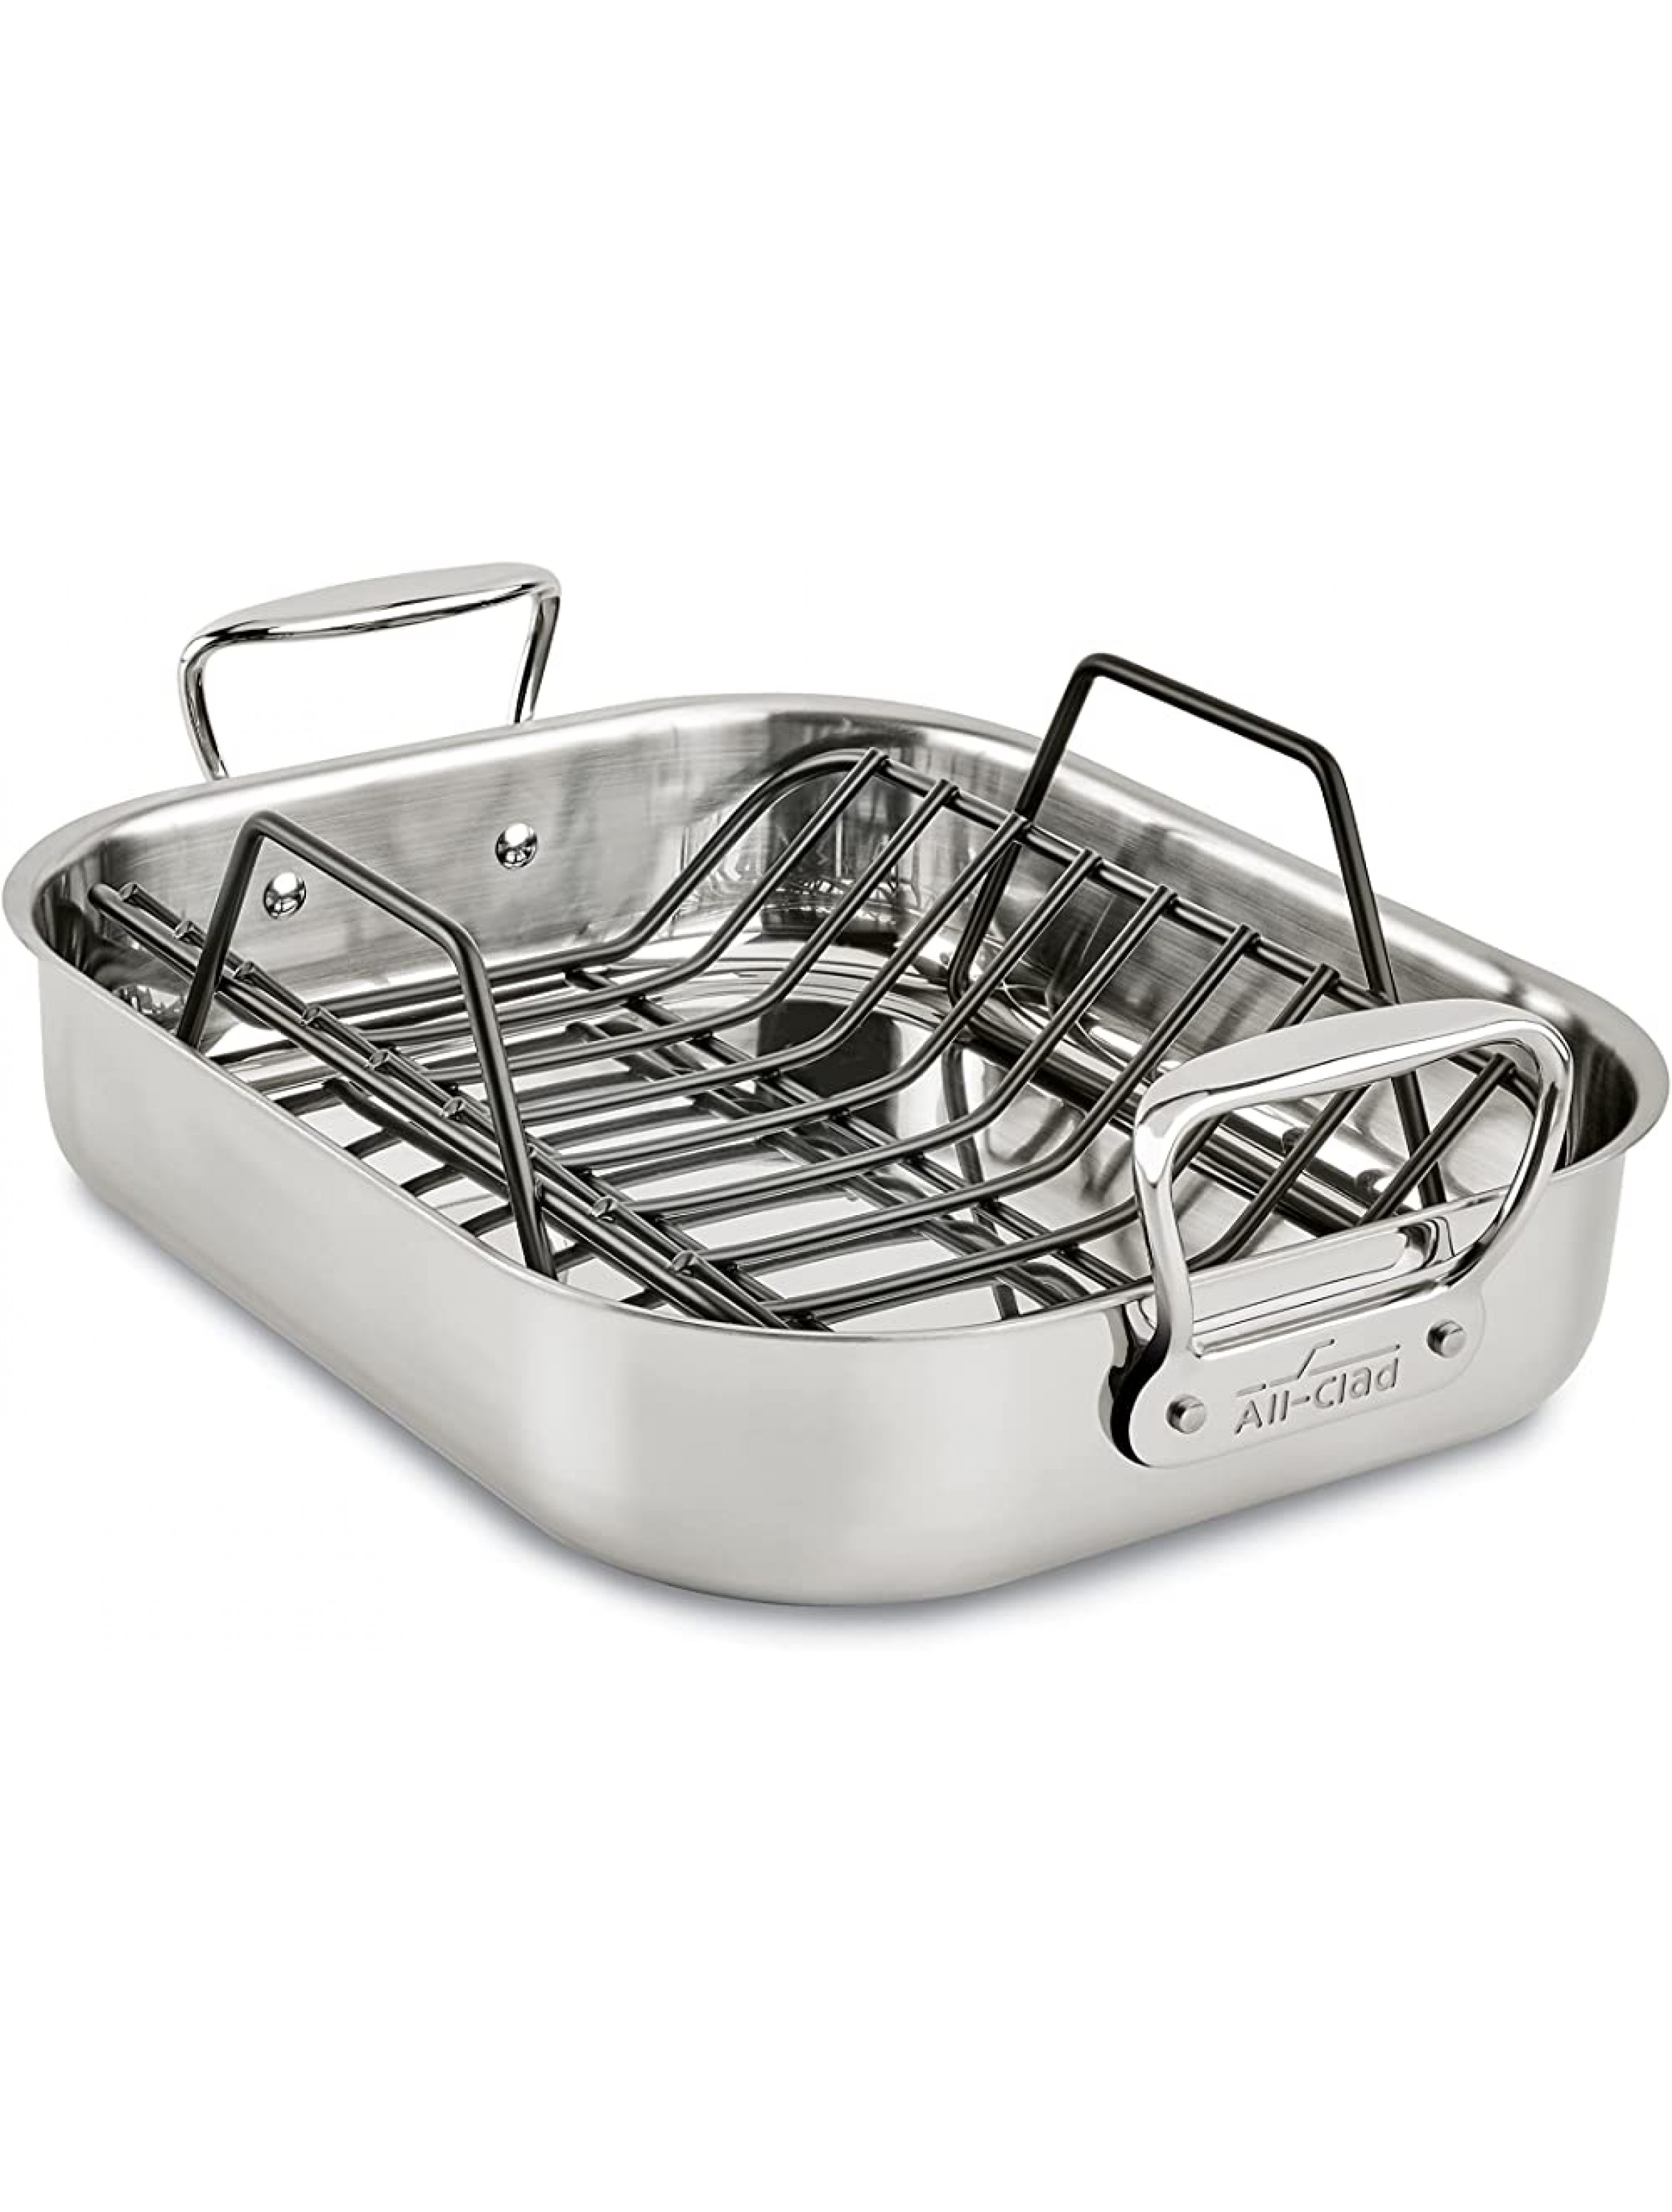 All-Clad Gourmet Stainless Steel Nonstick Roaster with Rack 11 x 14 inch Silver - BL5H8GXKA